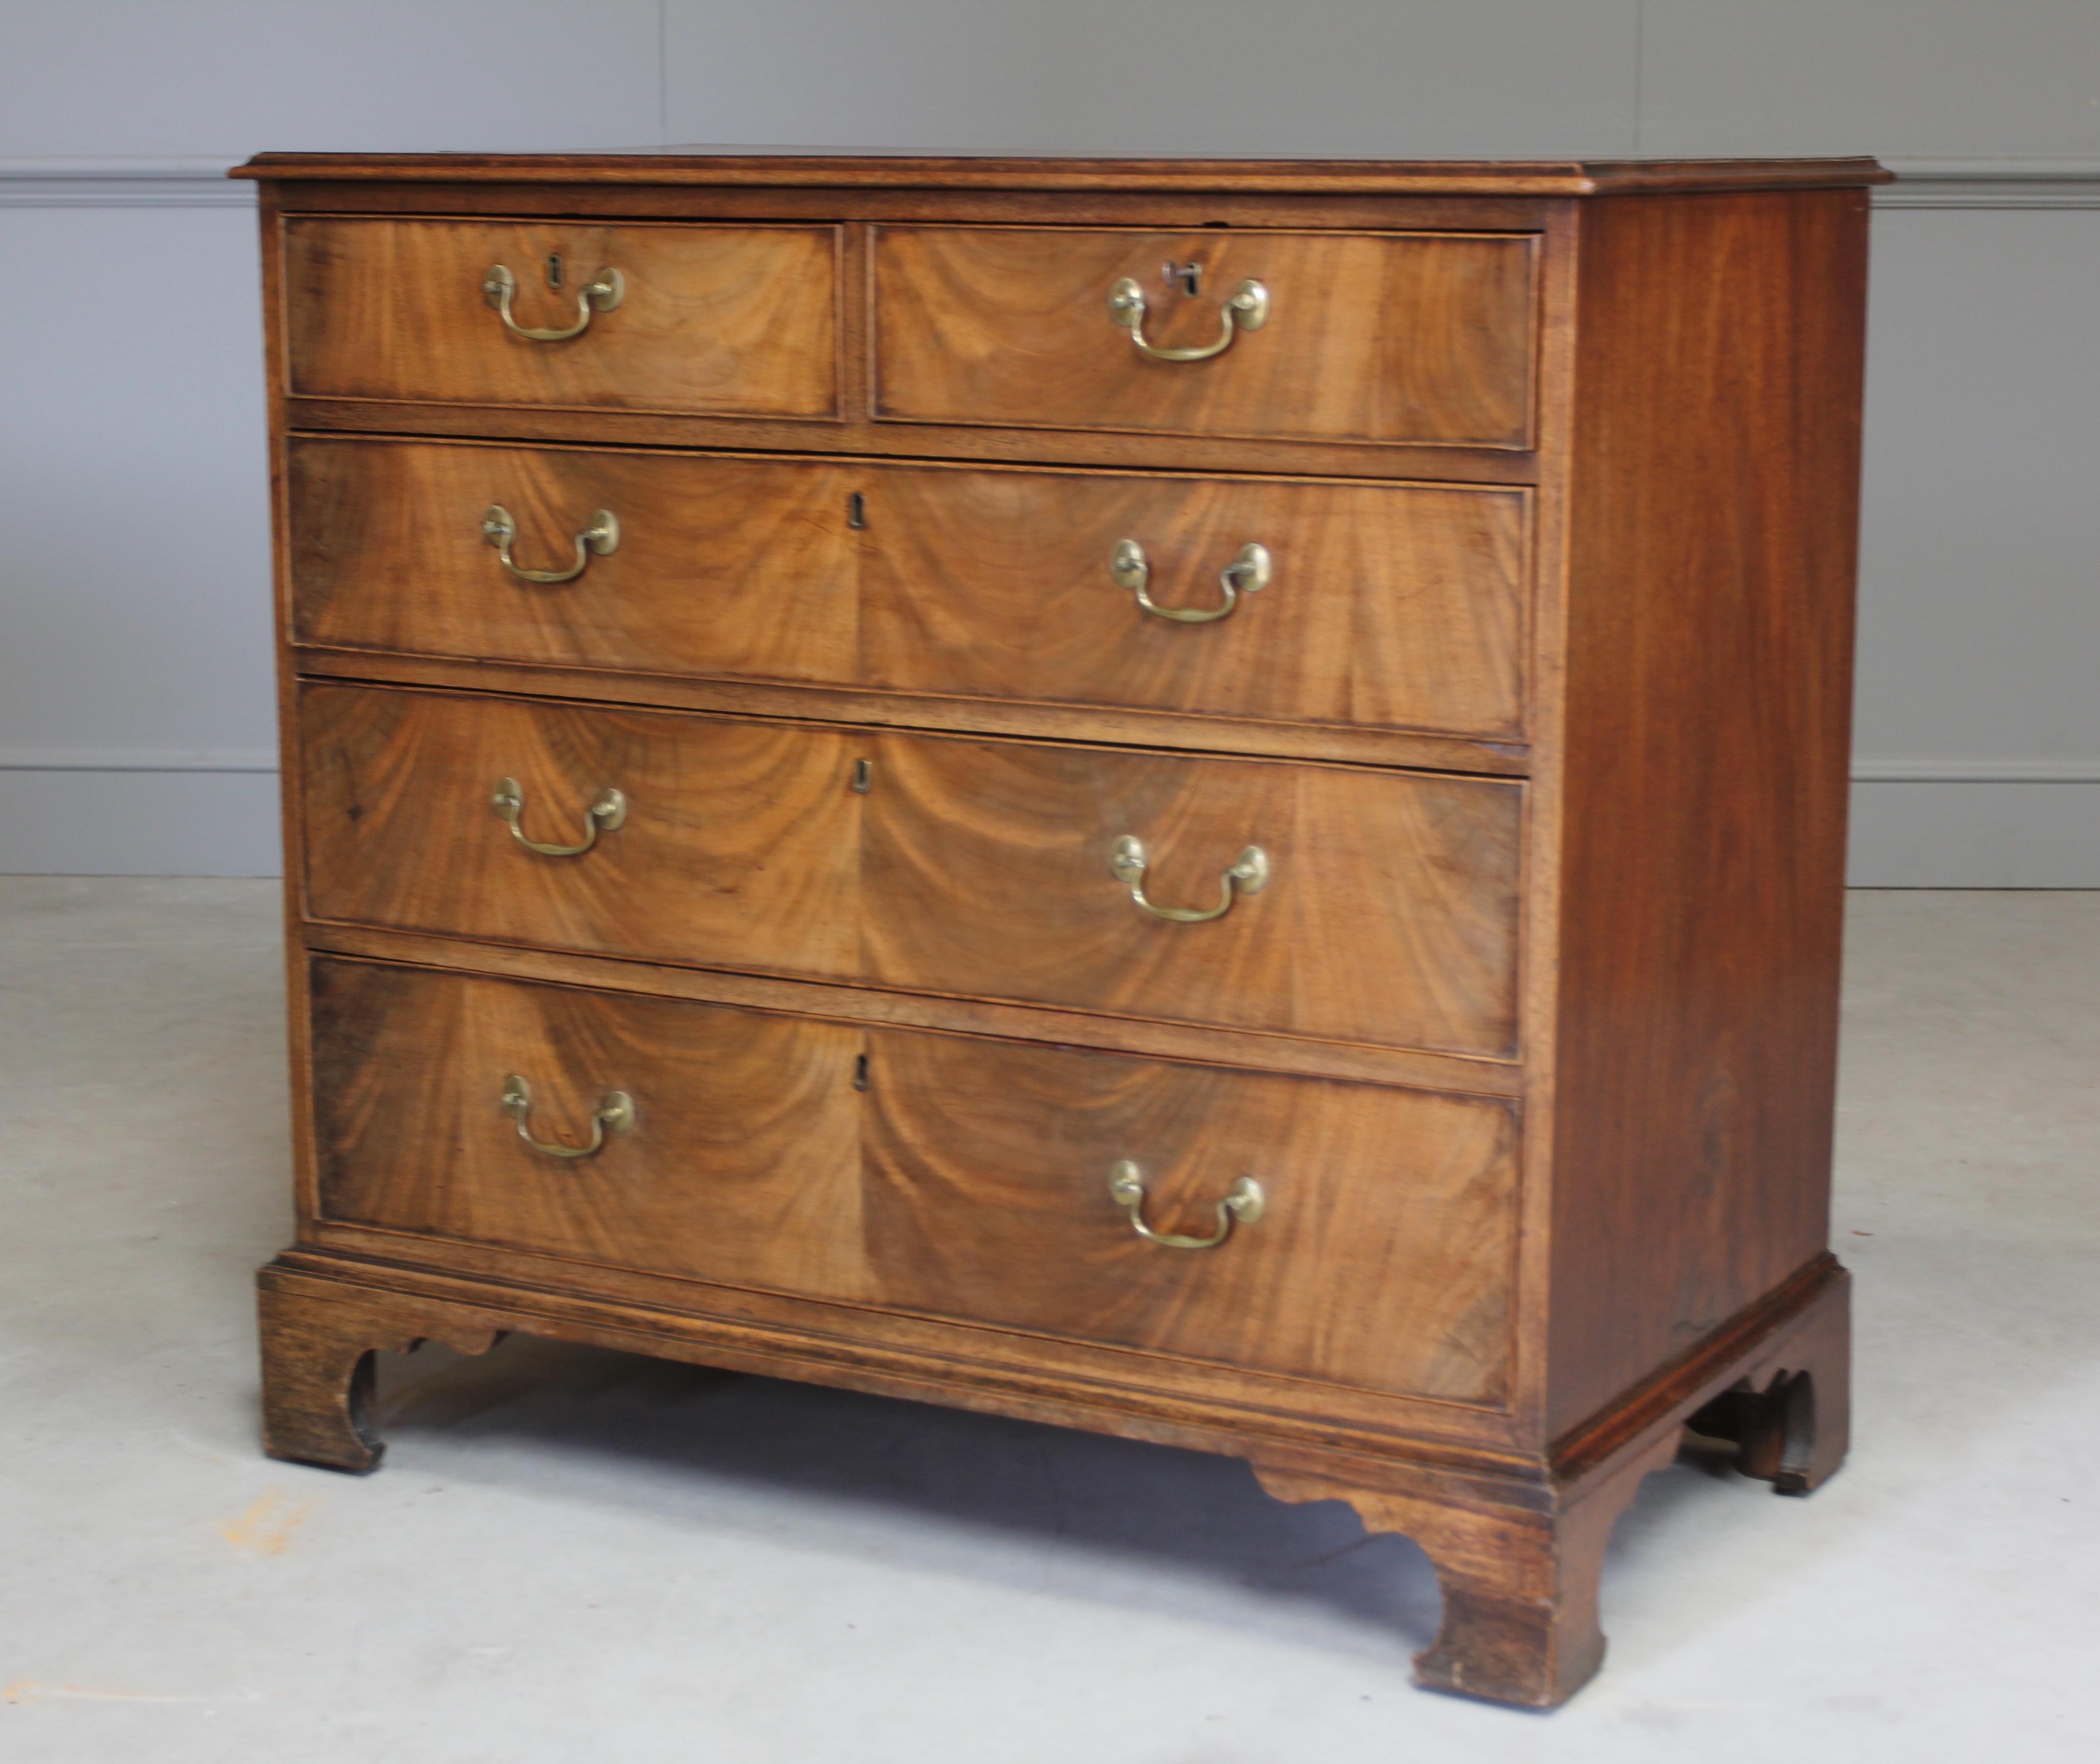 A George III mahogany chest of two short over three long graduated drawers with brass swing handles on bracket feet. With a working key for one safe drawer.

Coming from the period of King George III this chest of drawers is truly something